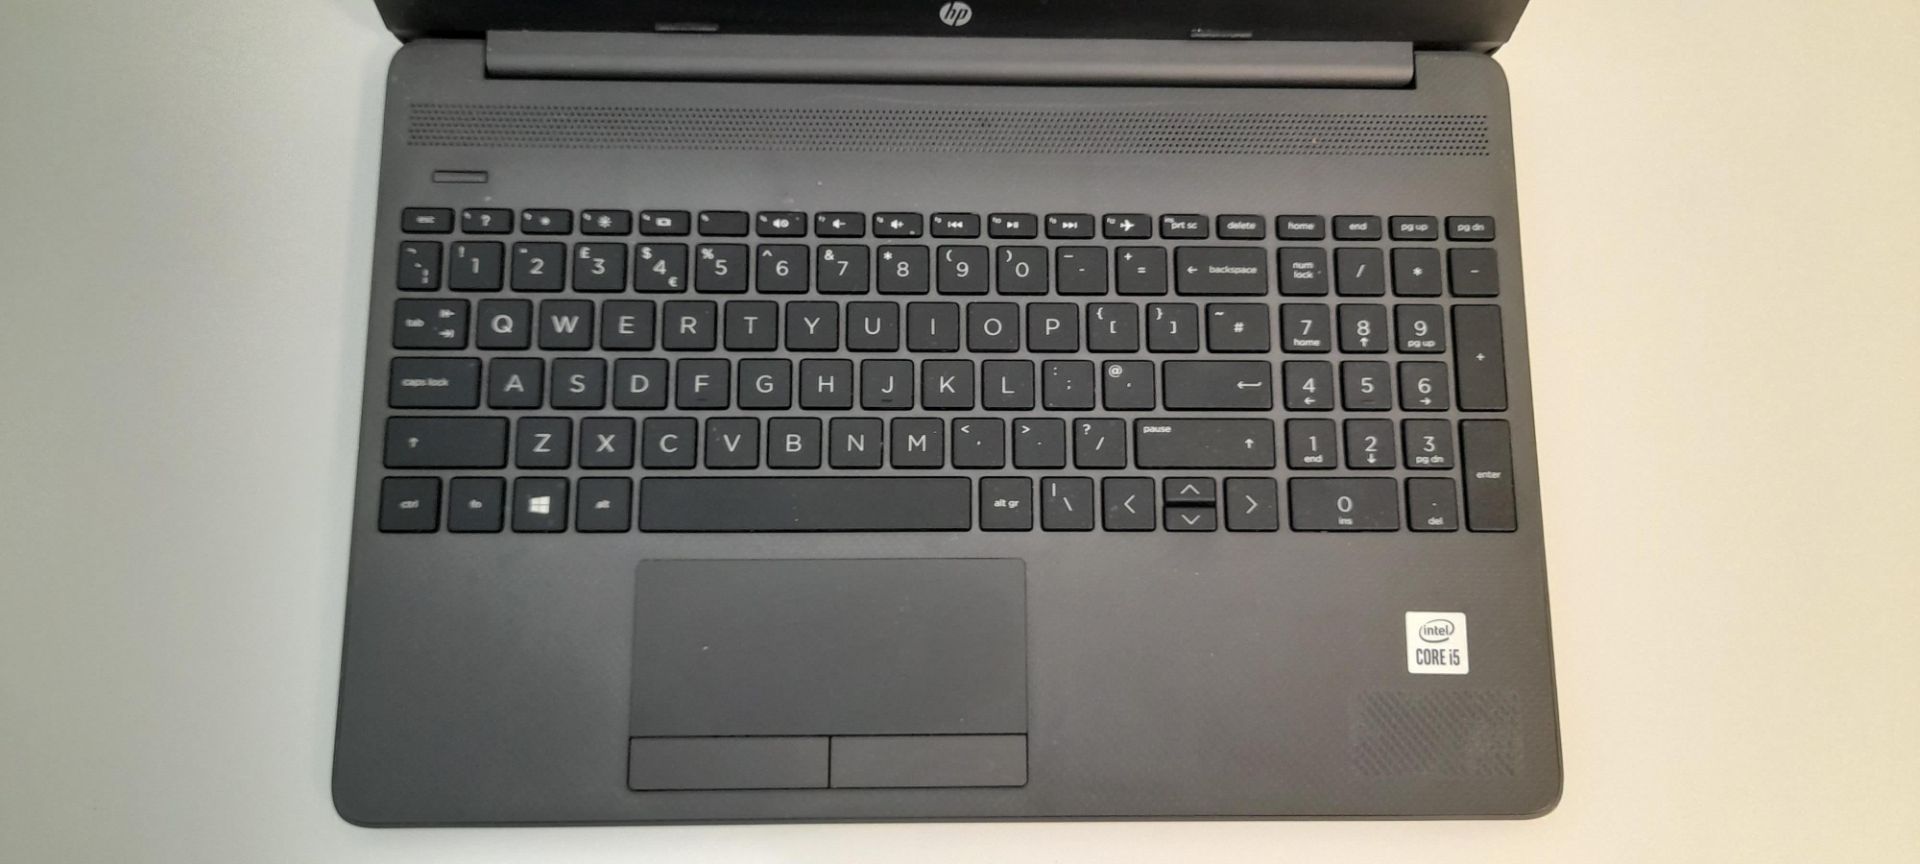 HP 250 G8 laptop with intel core i5. Collection from Canary Wharf, London, E14 - Image 3 of 7